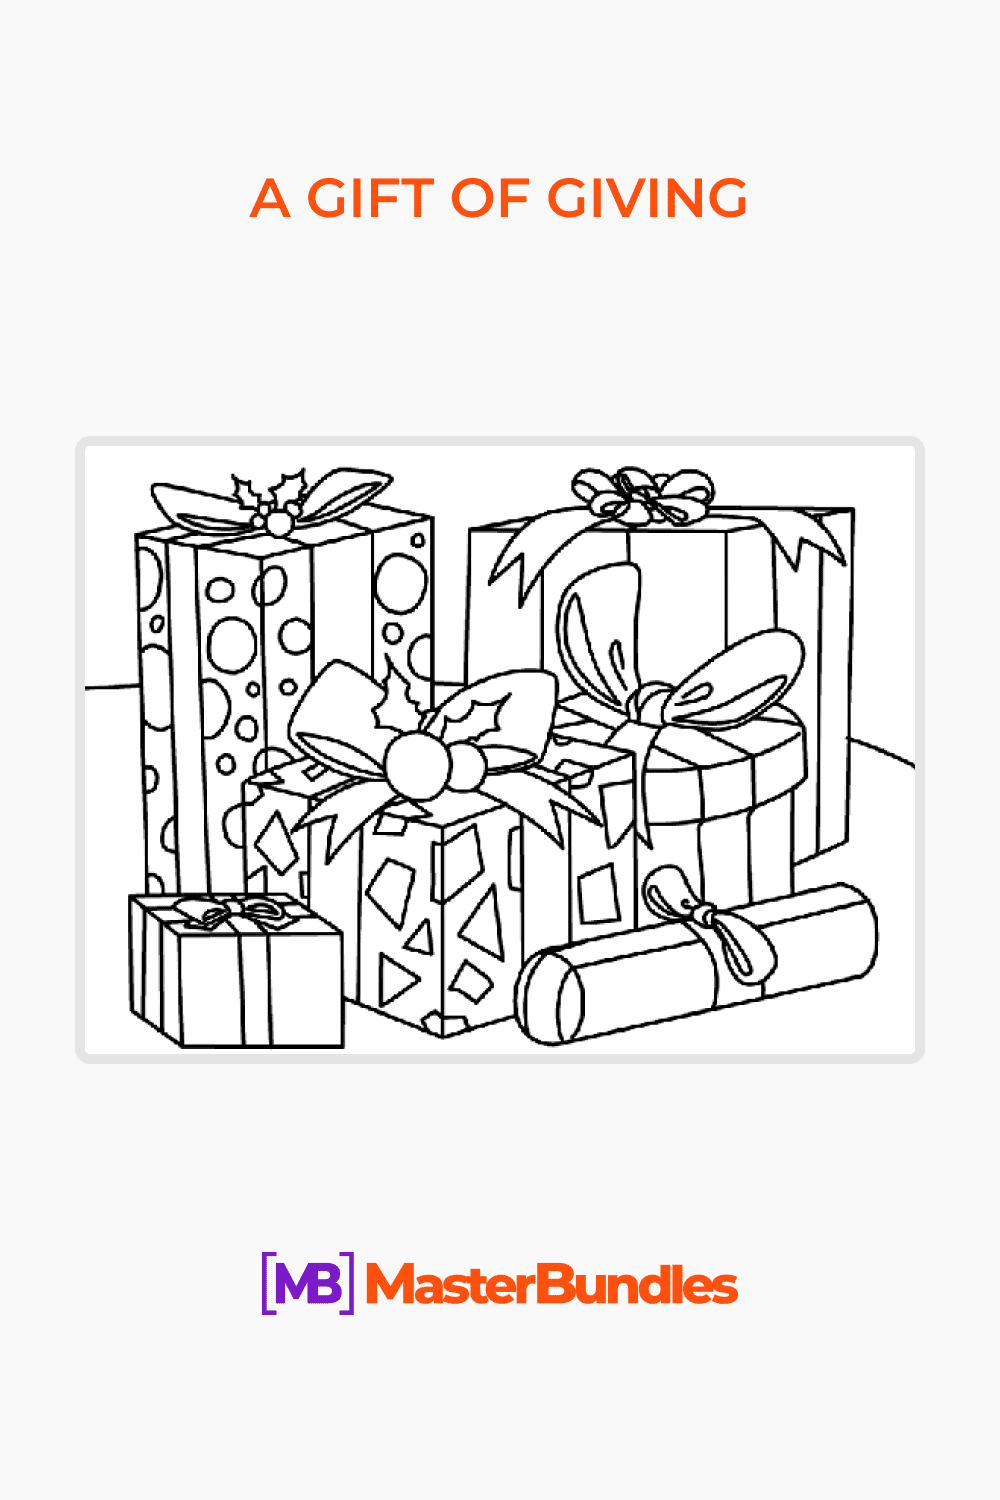 A gift of giving coloring page pinterest image.